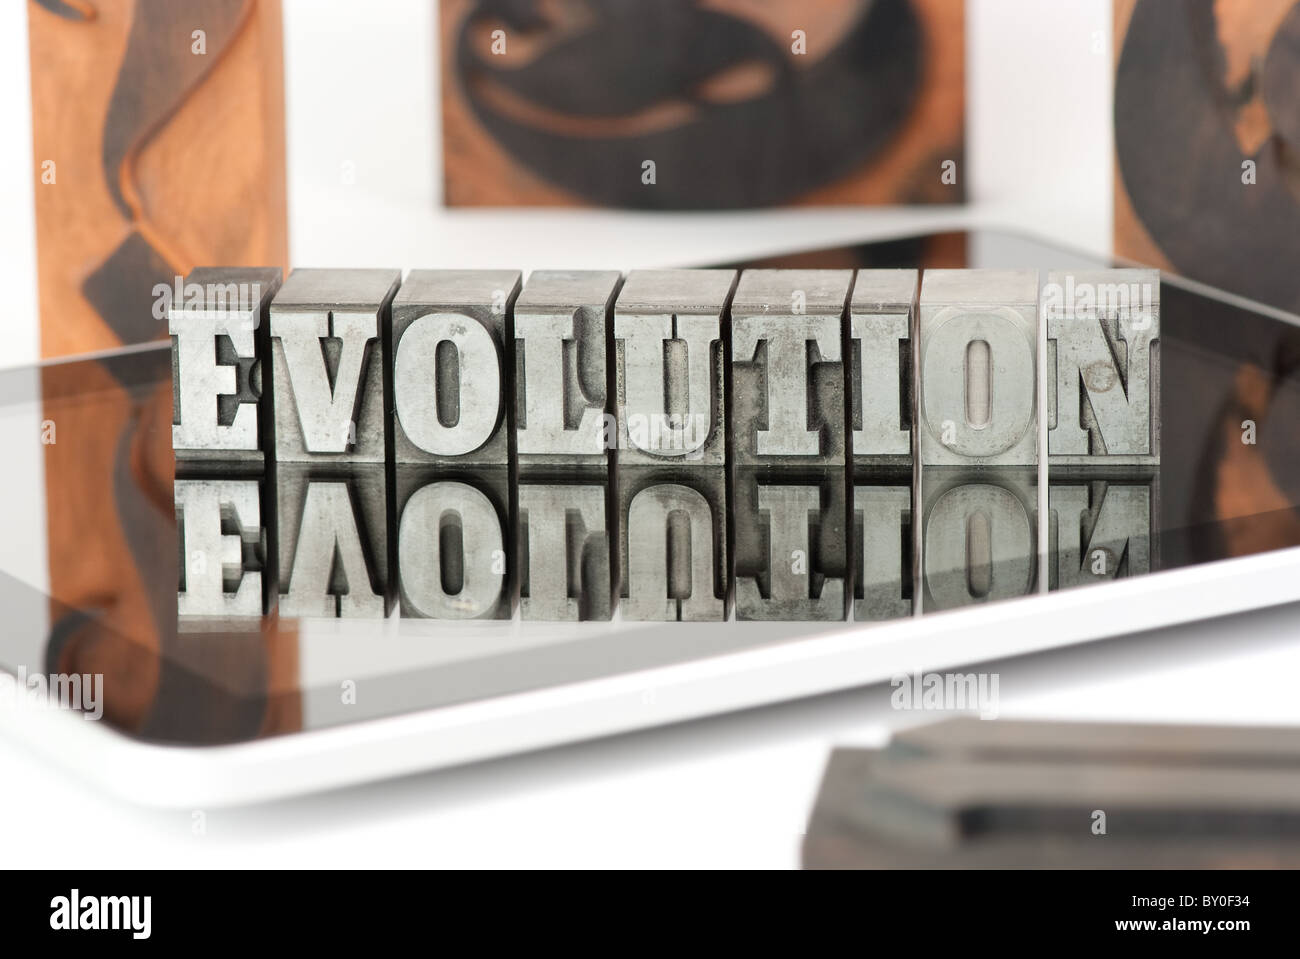 The word EVOLUTION in plumb letters, standing on a tablet pc, surrounded by wooden letters Stock Photo